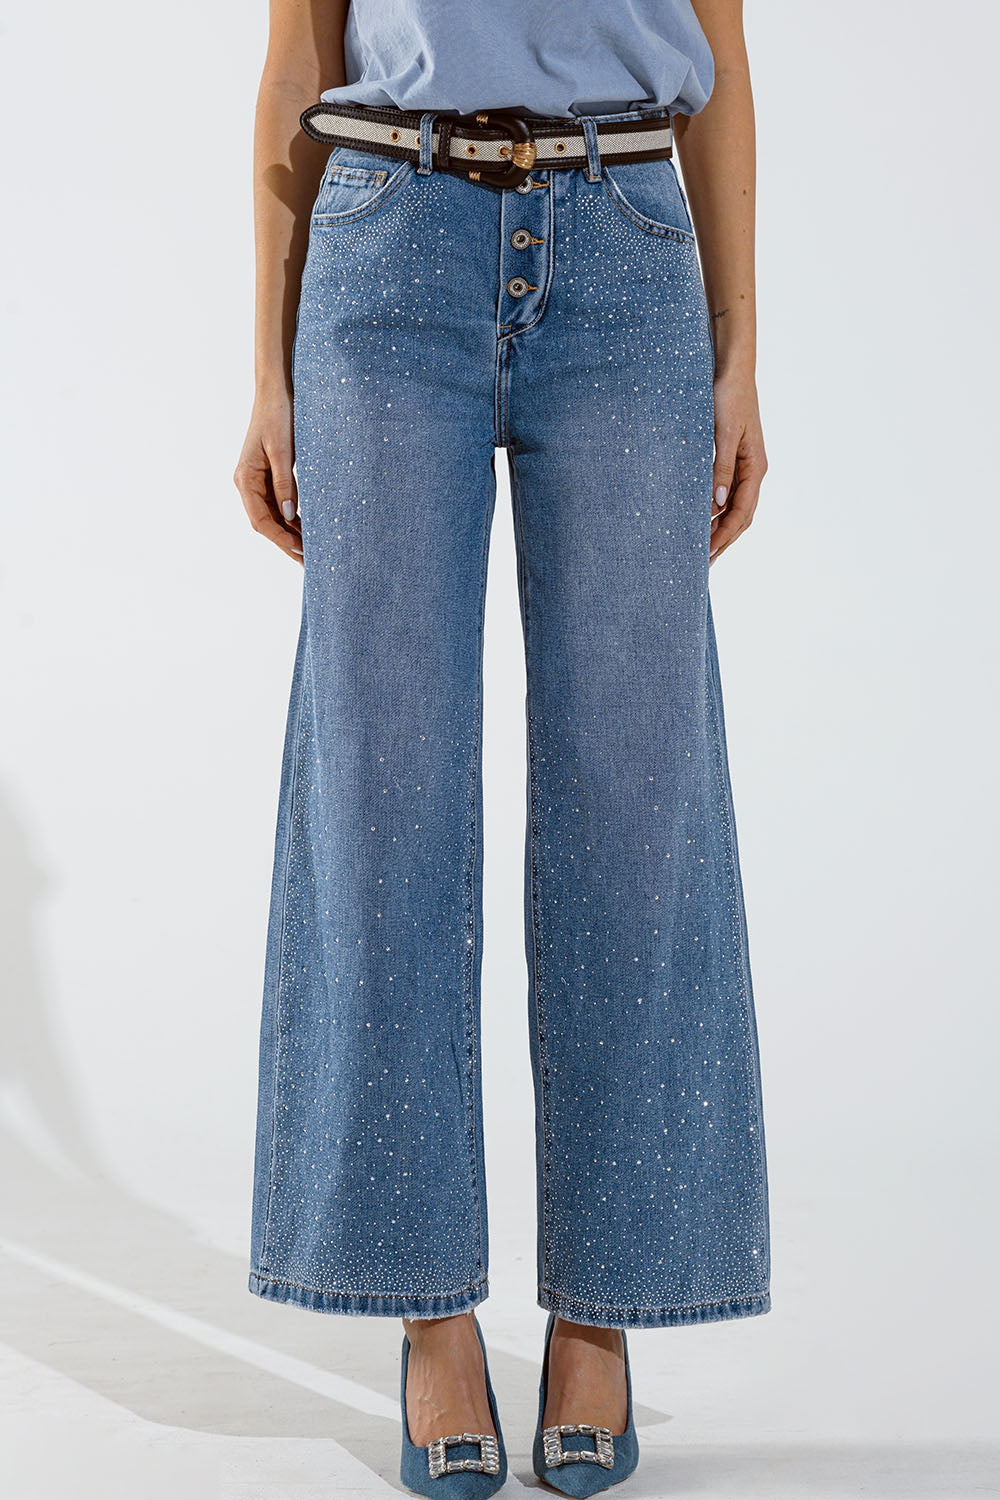 Q2 Wide Leg Jeans With Exposed Buttons And Stras Details in Mid Wash